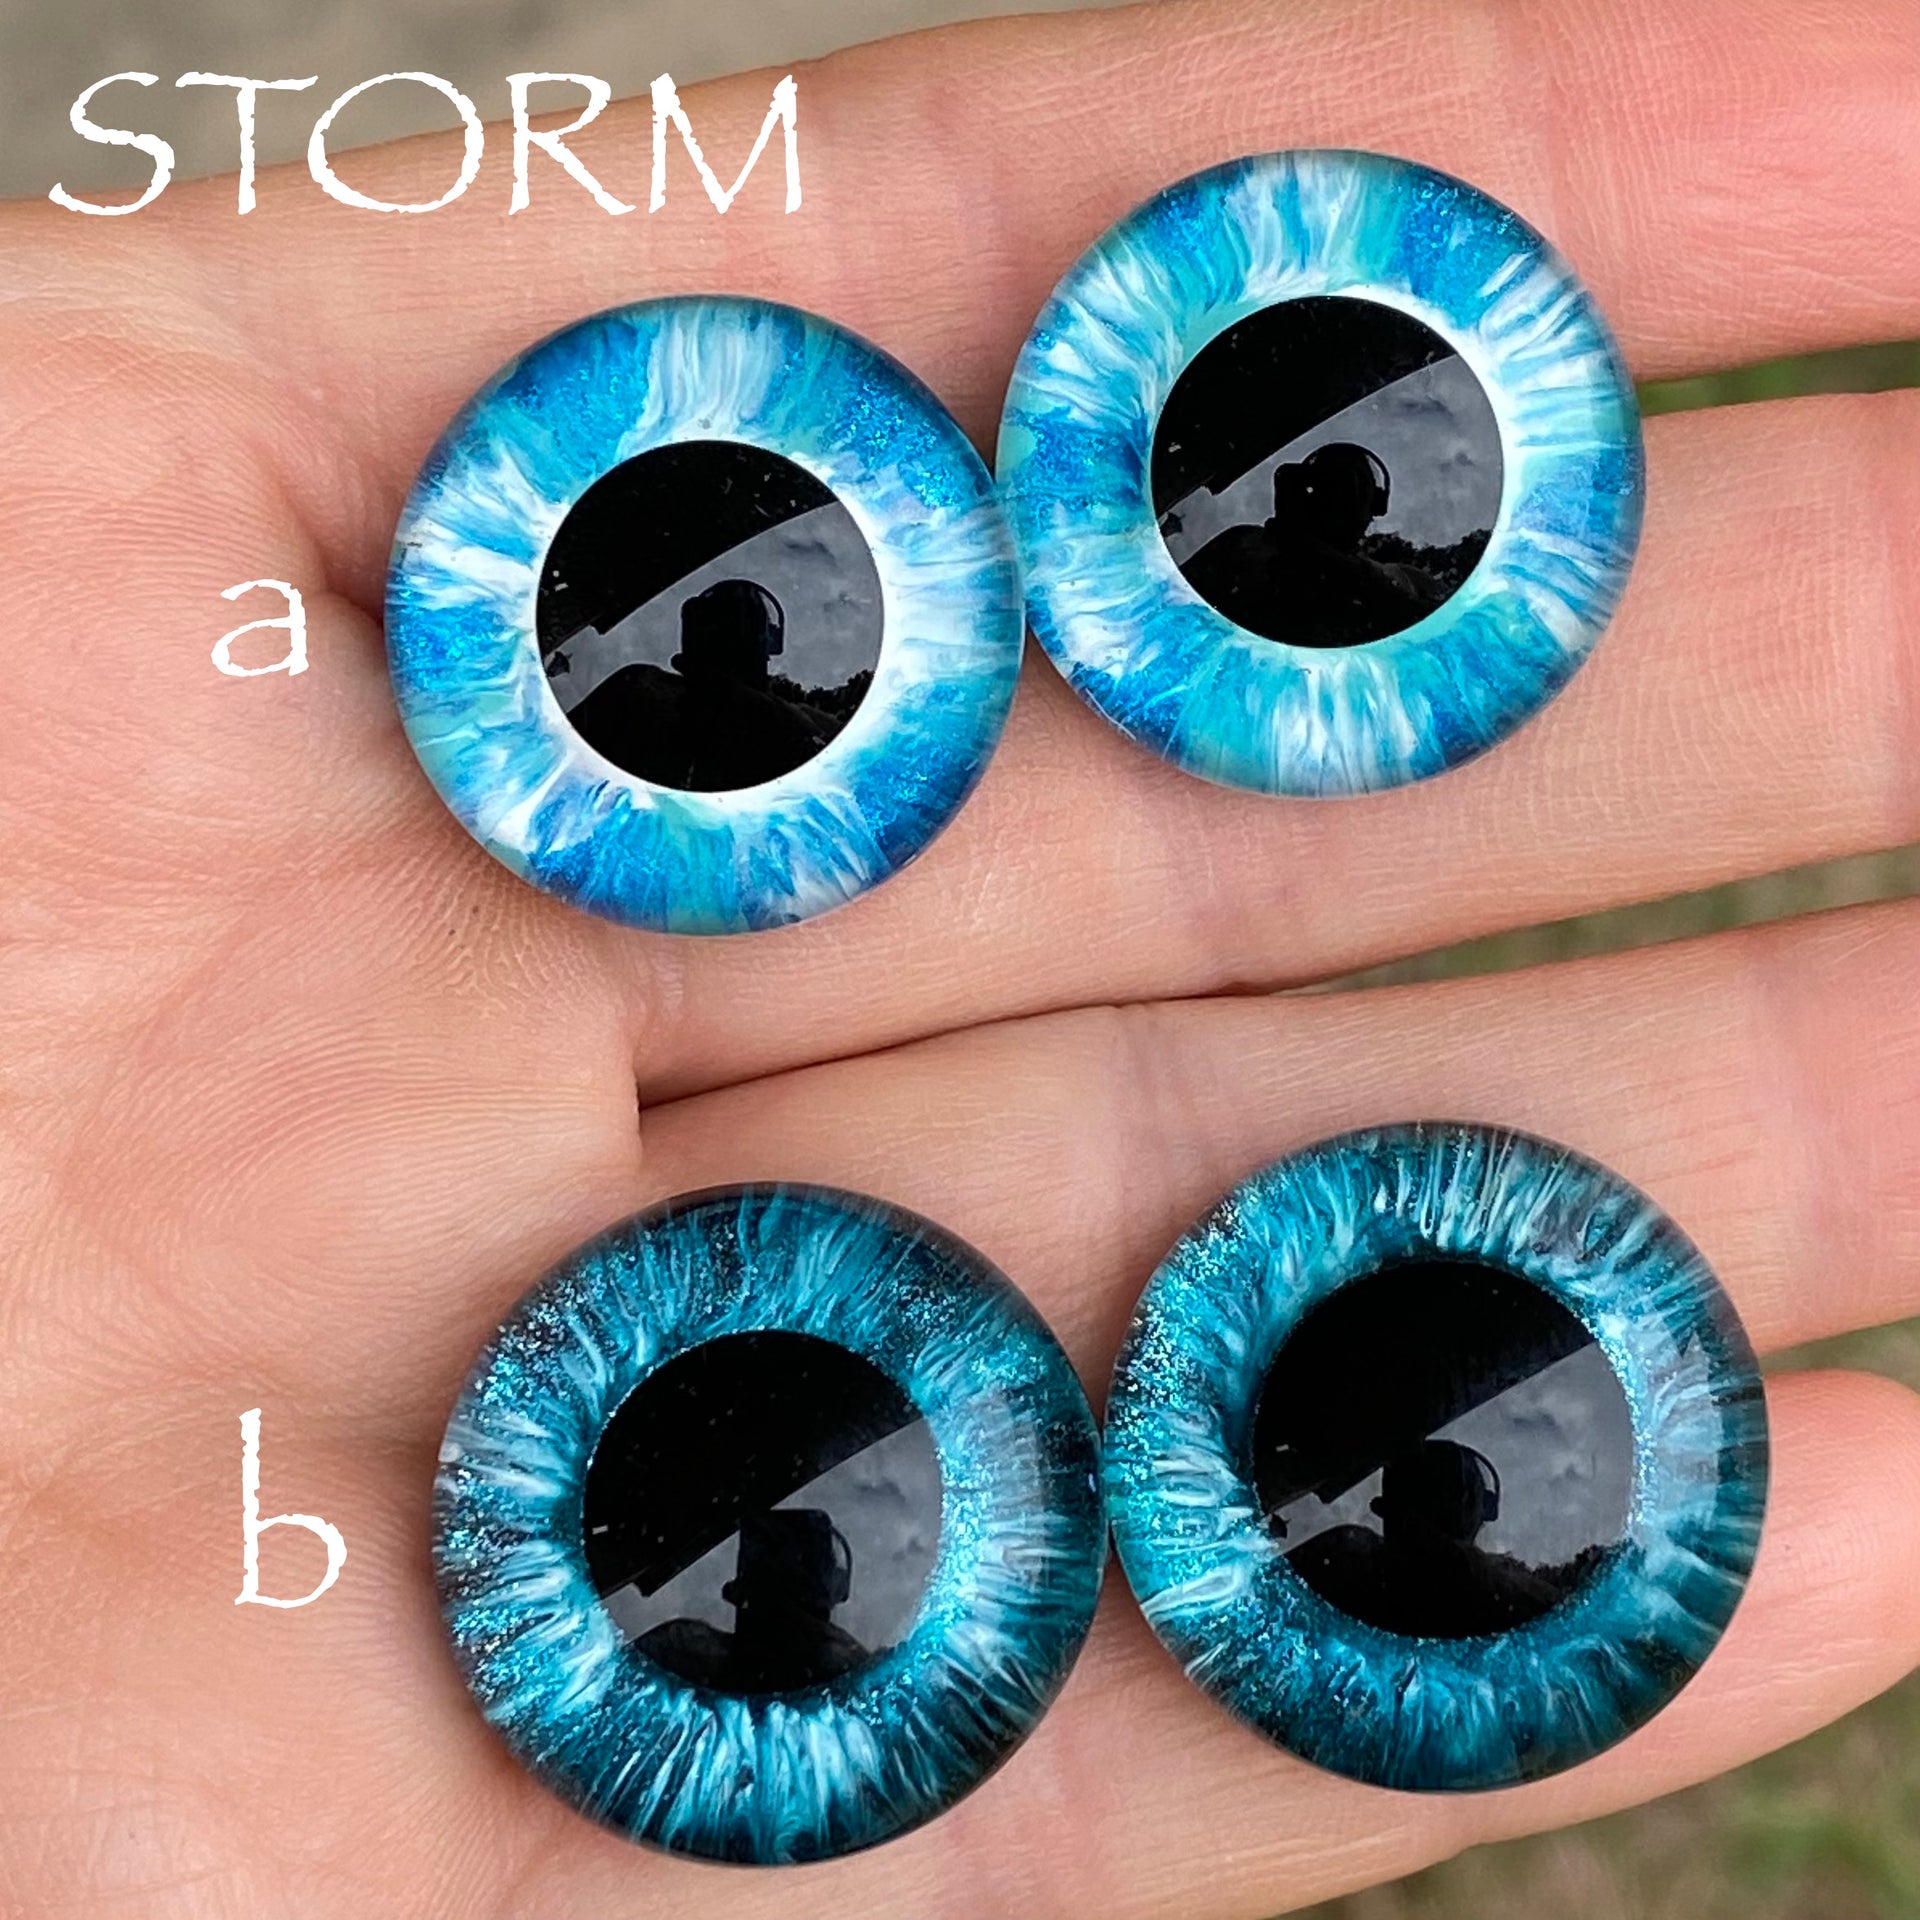 Hand Painted Eyes - Storm